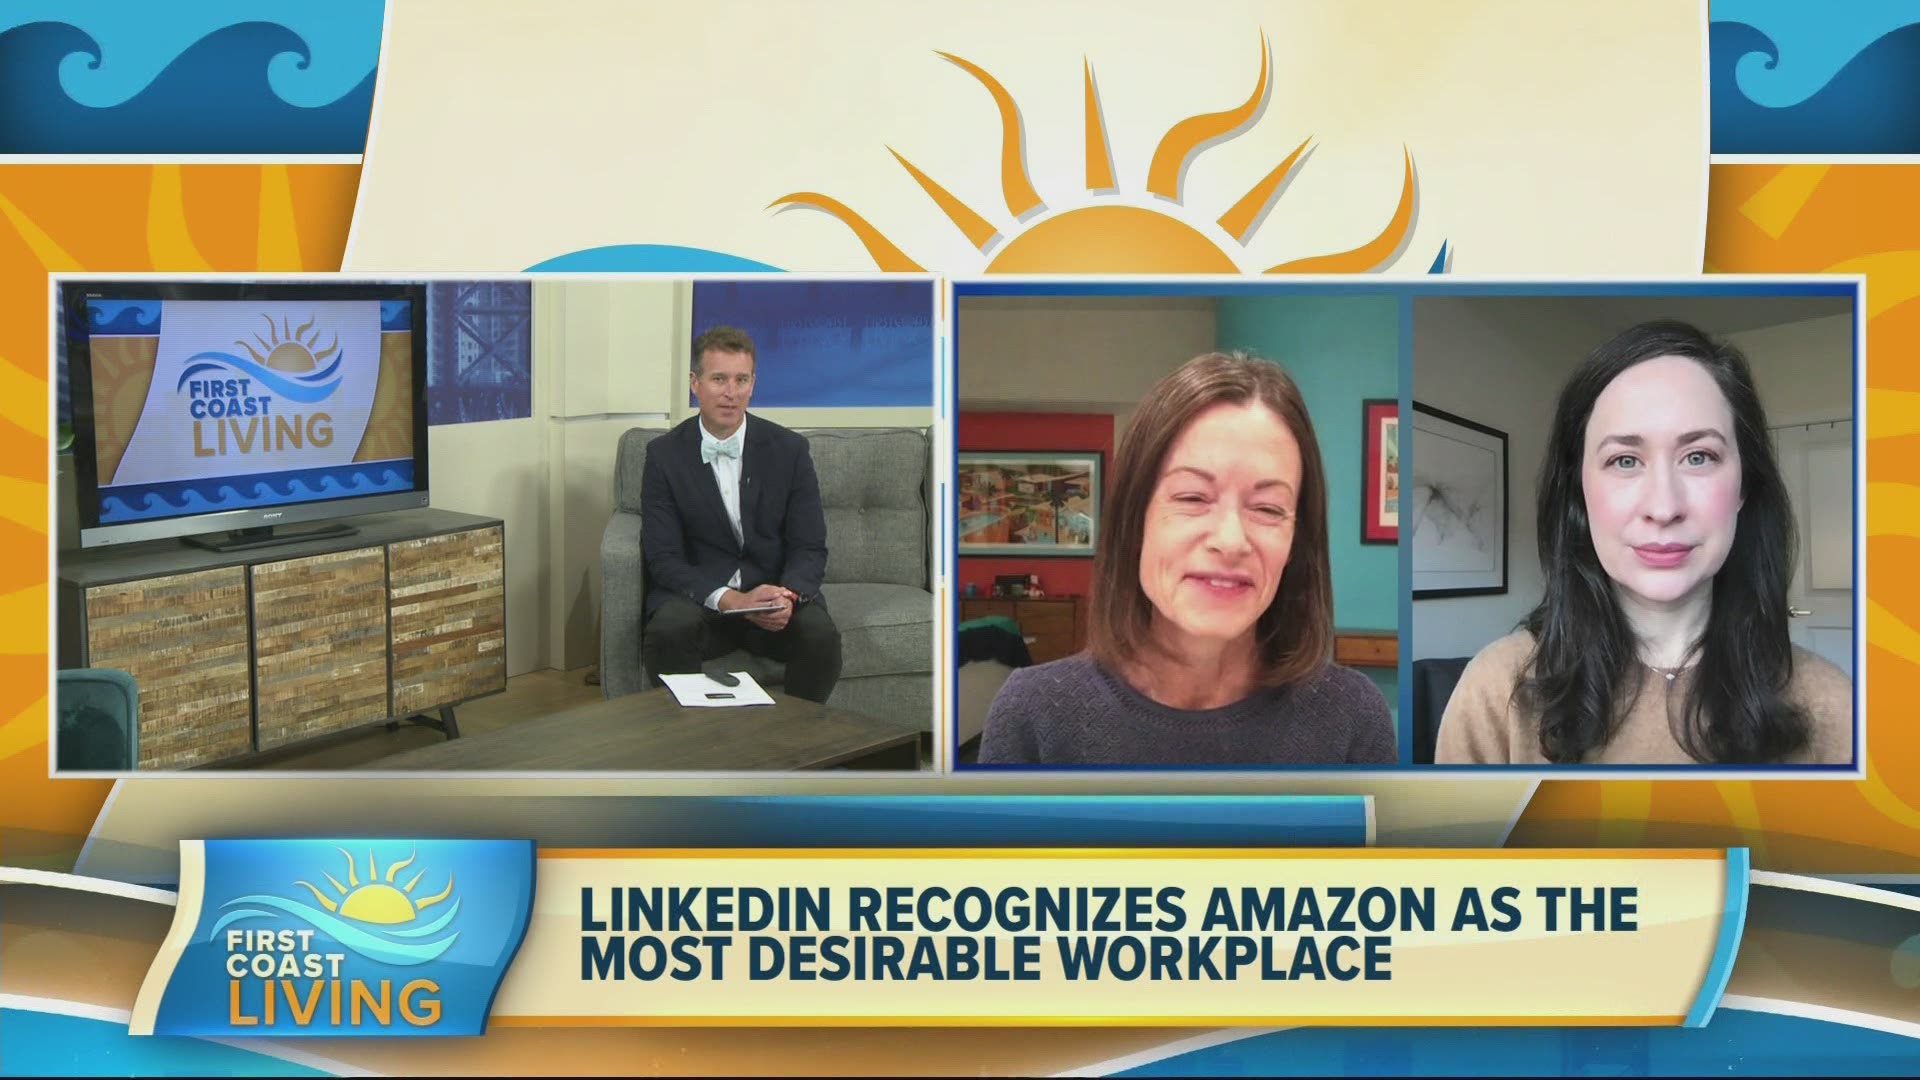 Amazon is the most desirable place to work. Learn why.